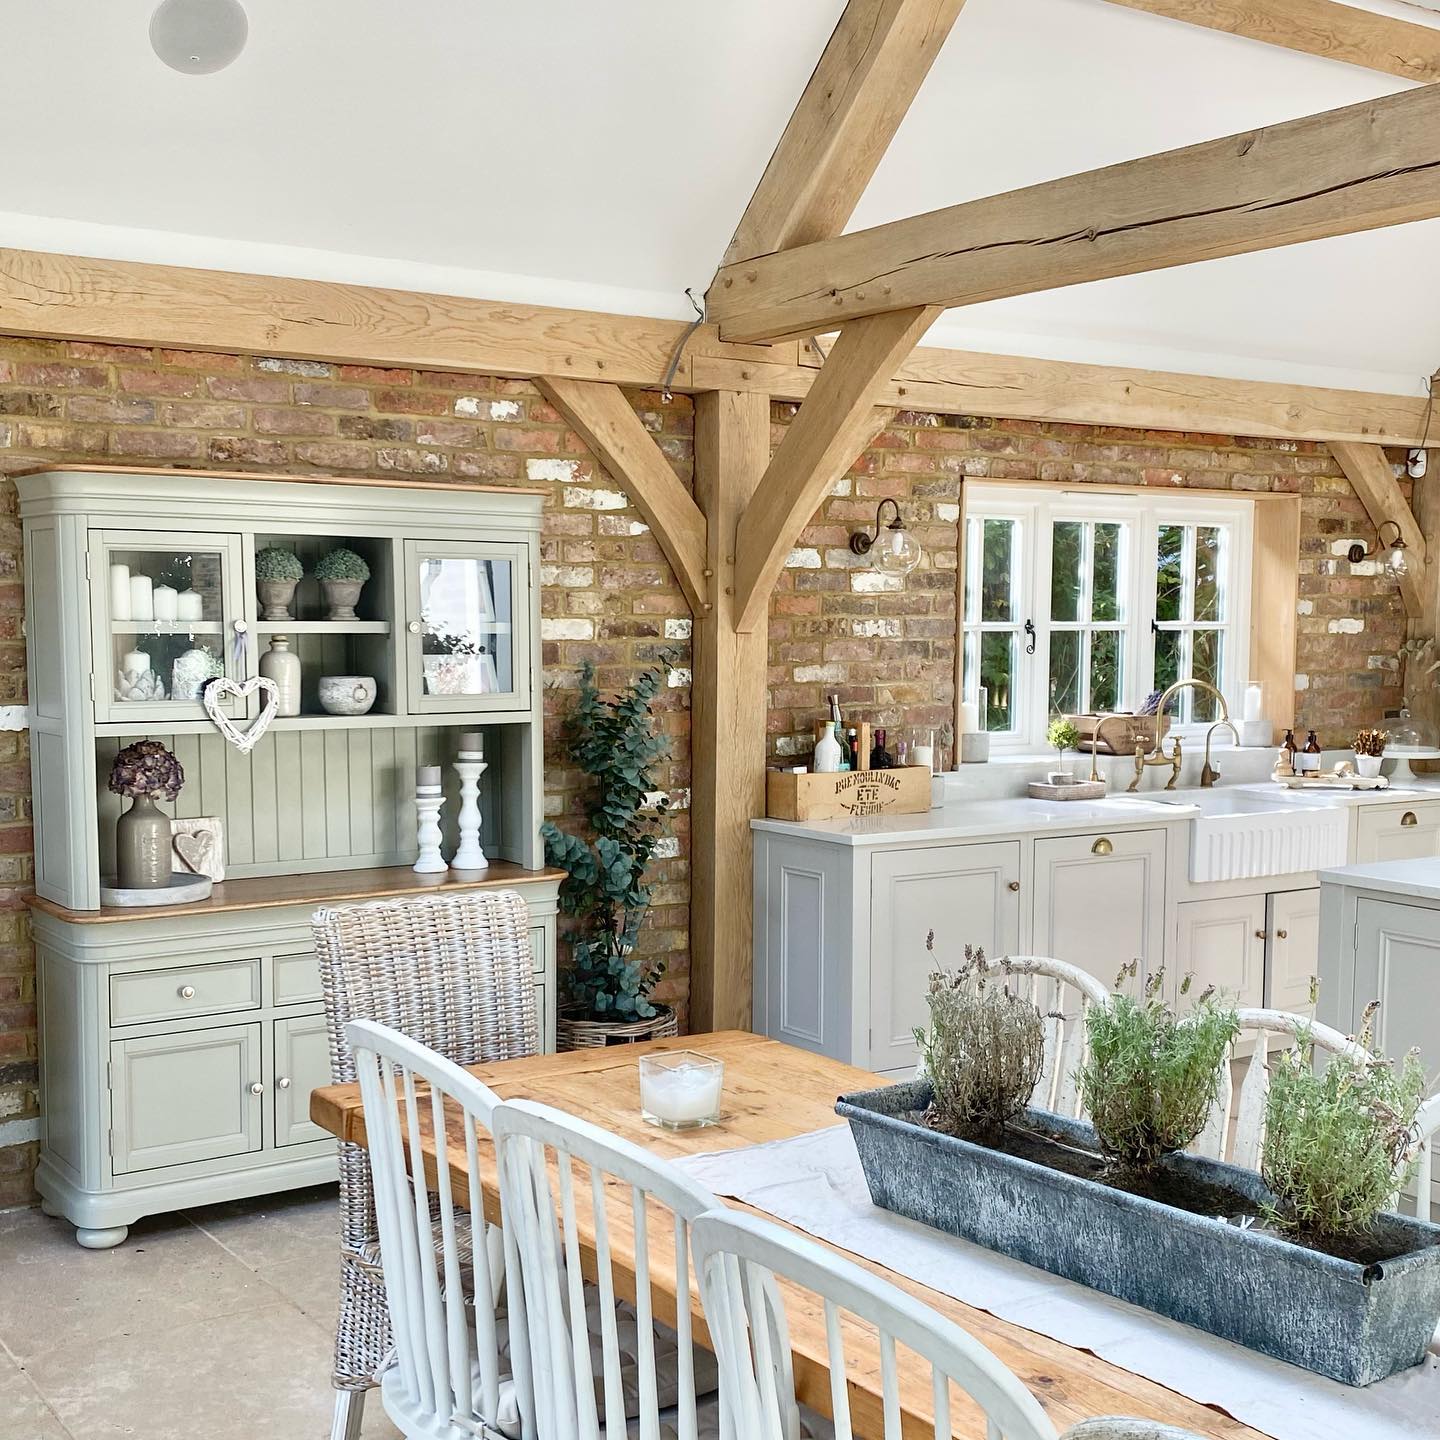 Brindle large dreser in a farmhouse-style kitchen.